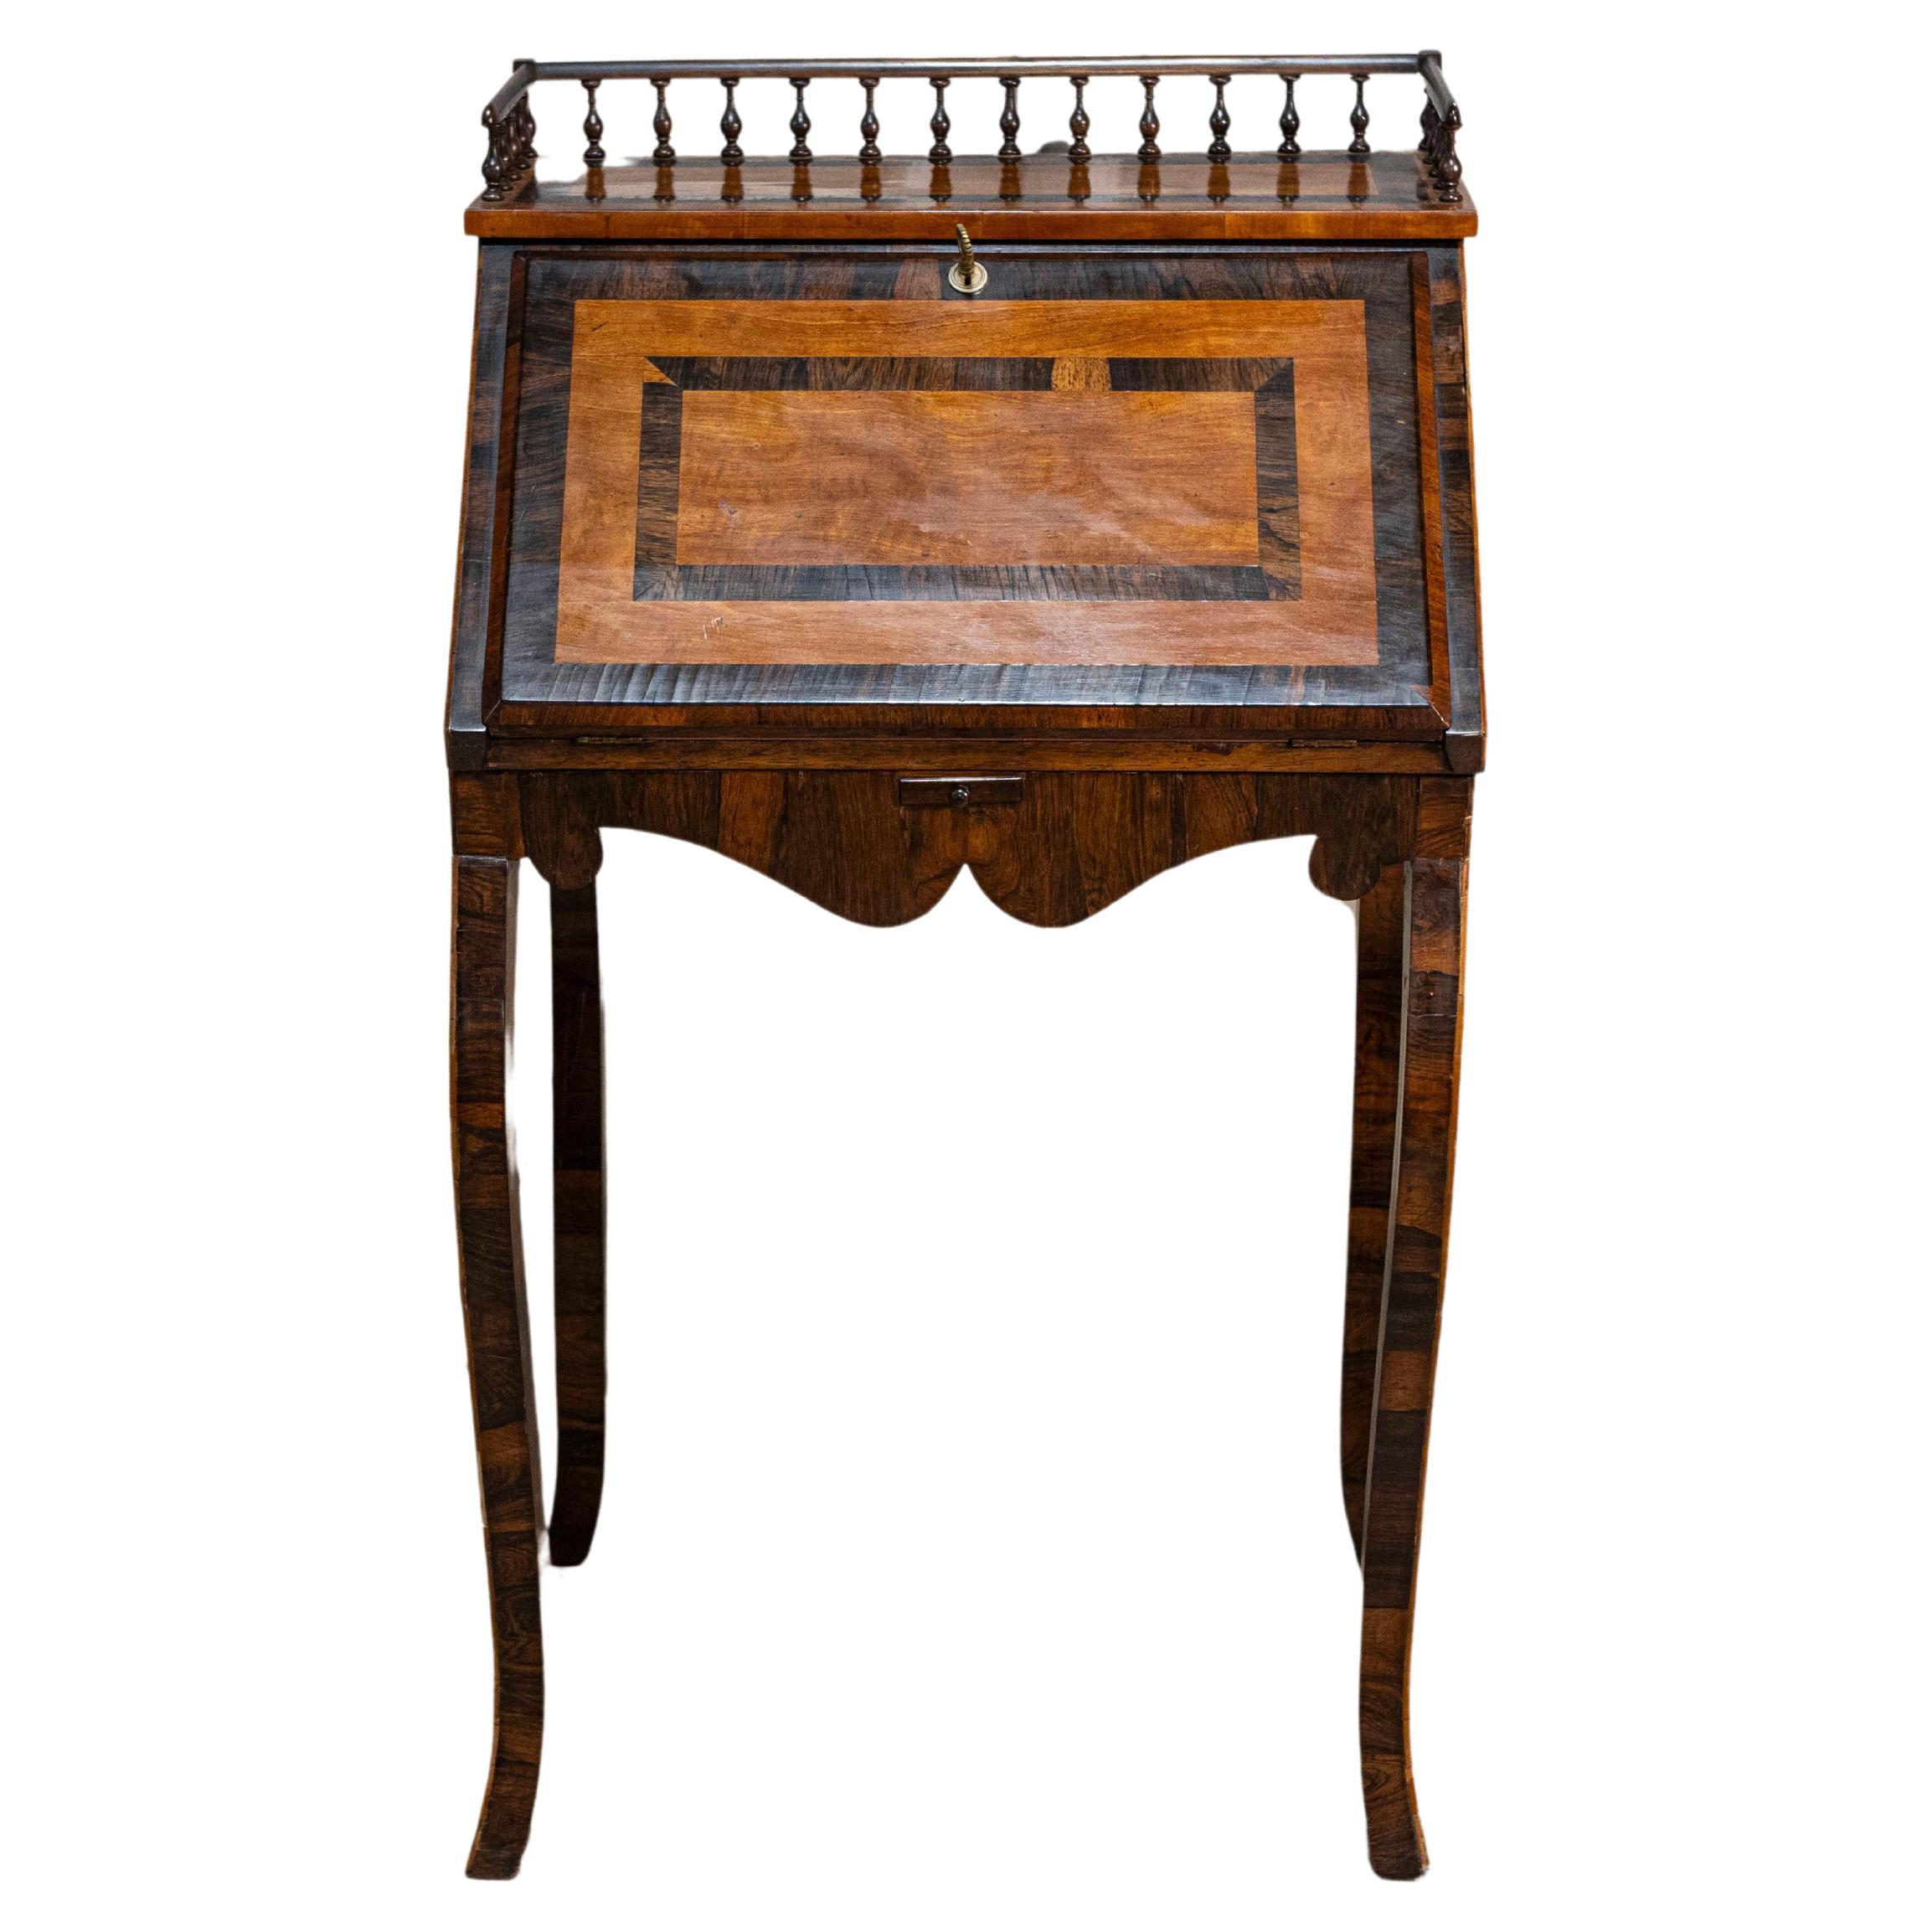 Italian 19th Century Walnut and Mahogany Writing Table with Slant Front Desk For Sale